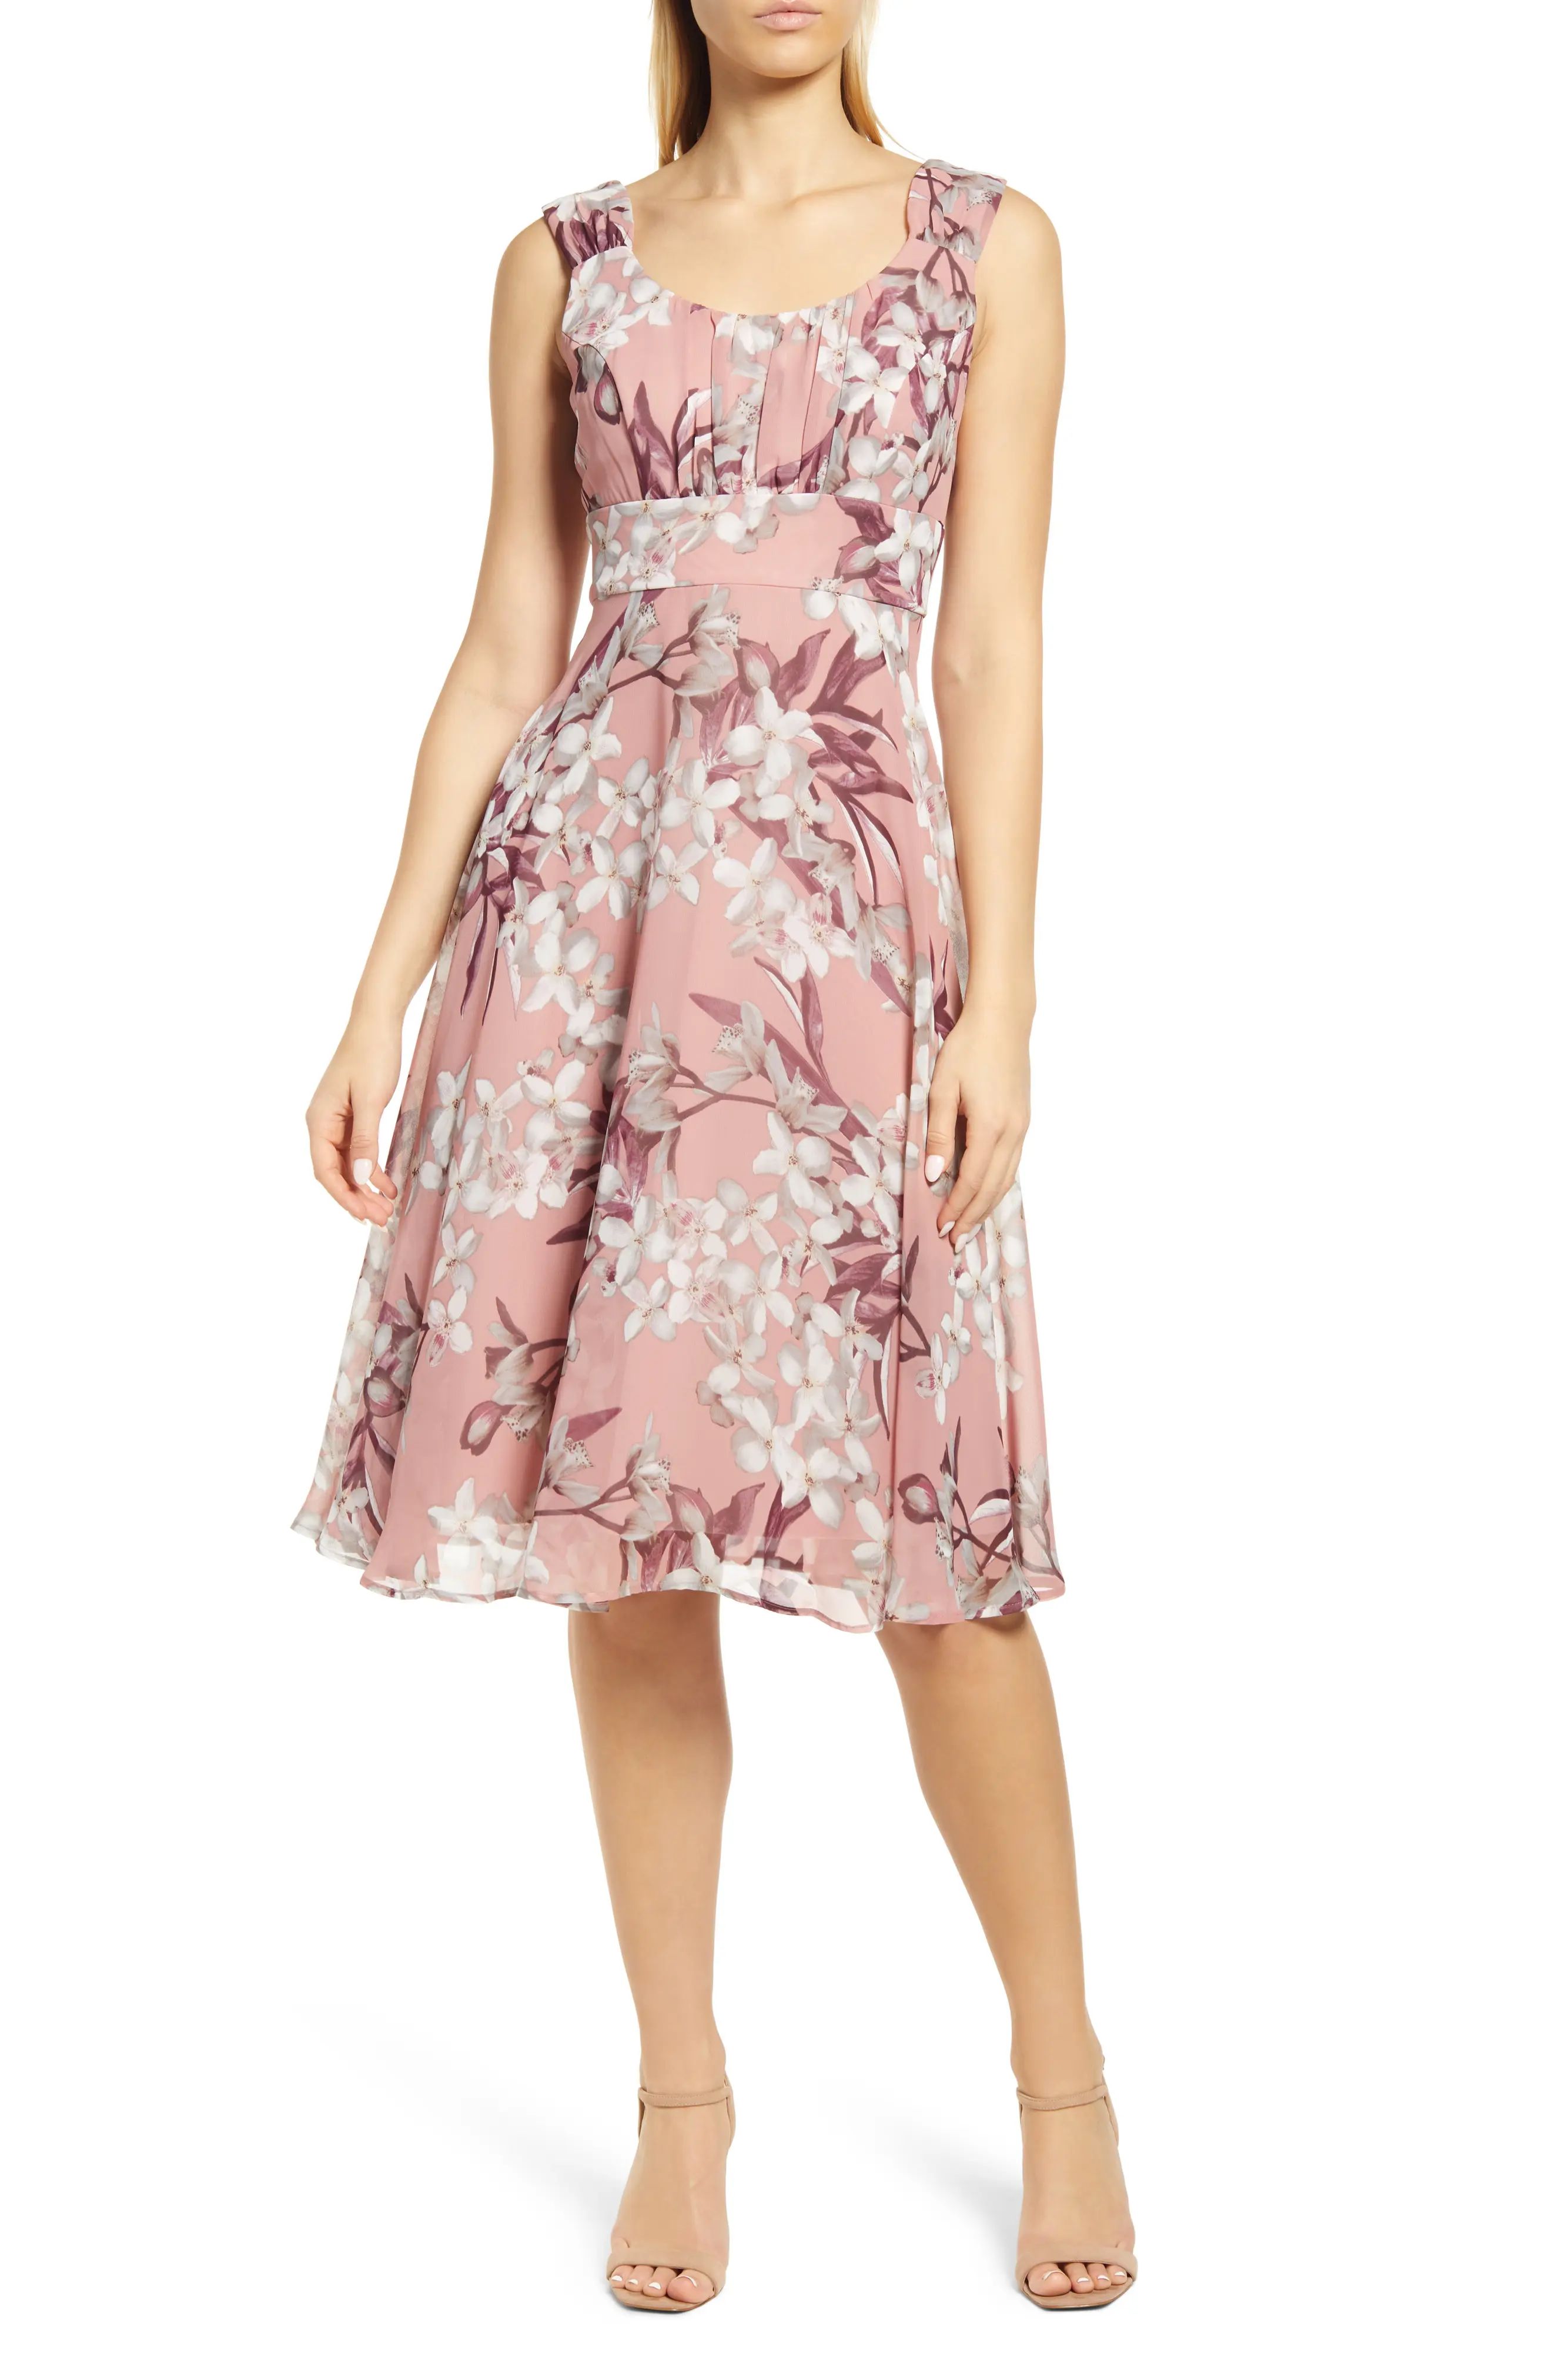 Connected Apparel Pleated Bodice Floral Print Chiffon Dress in Antique Rose at Nordstrom, Size 4 | Nordstrom